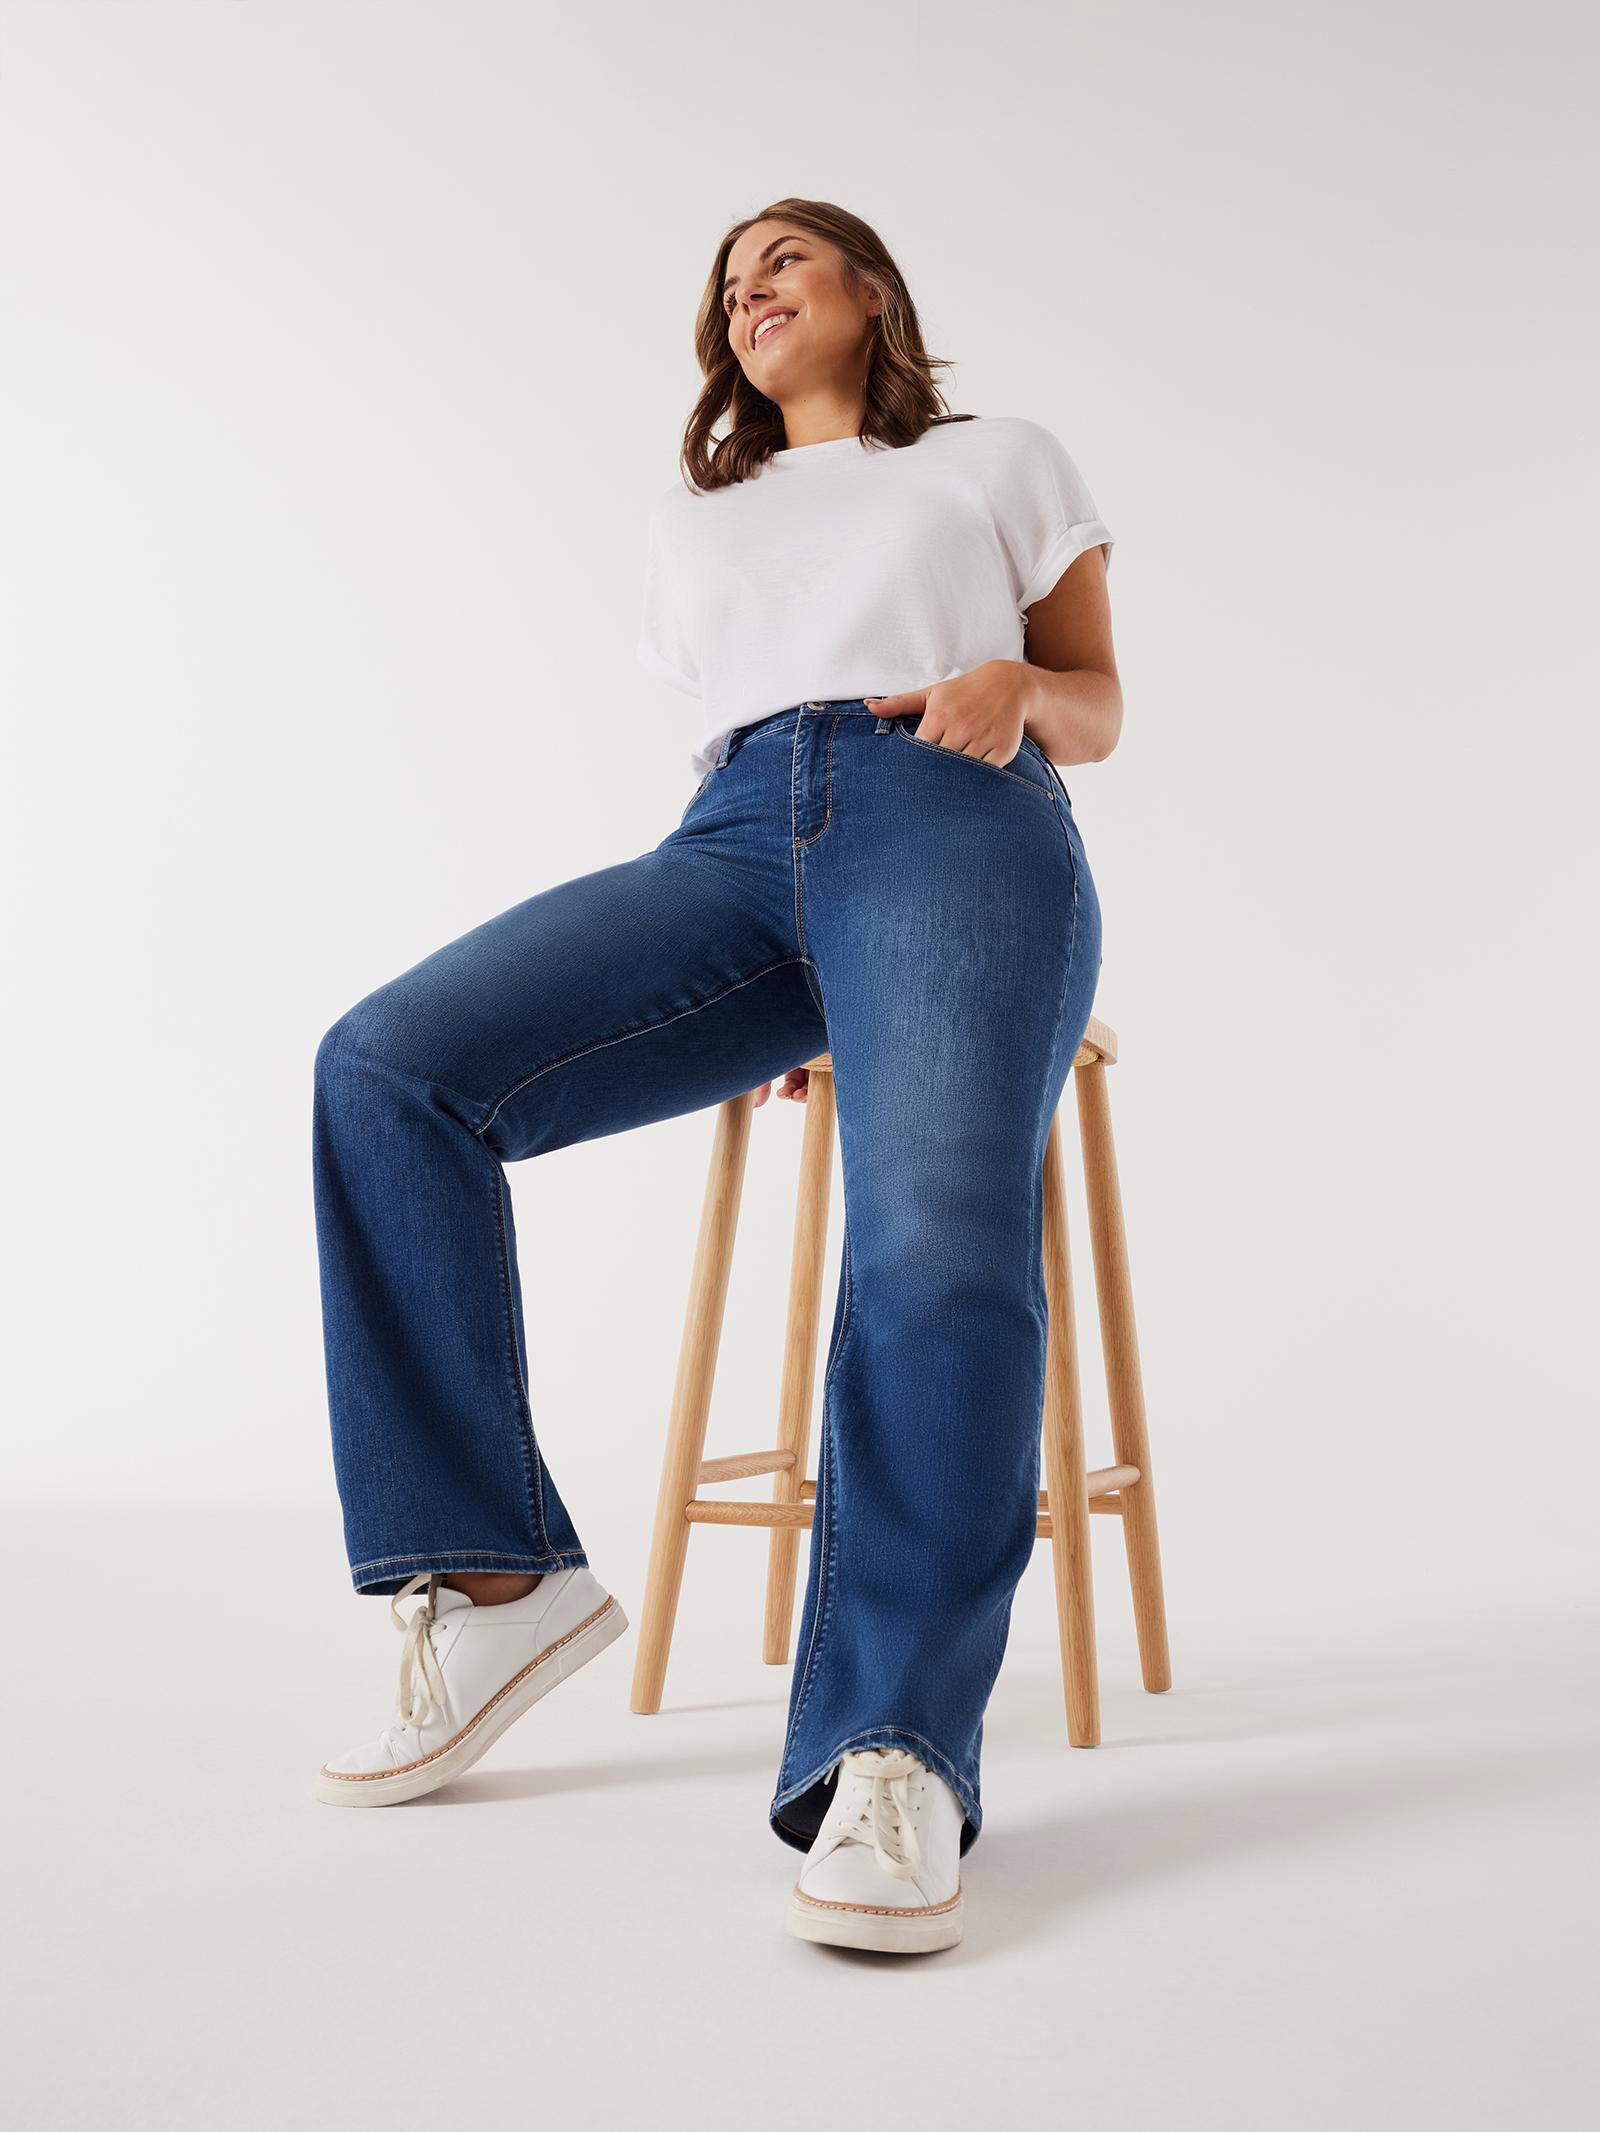 Straight vs Bootcut Jeans: What Is the Difference?